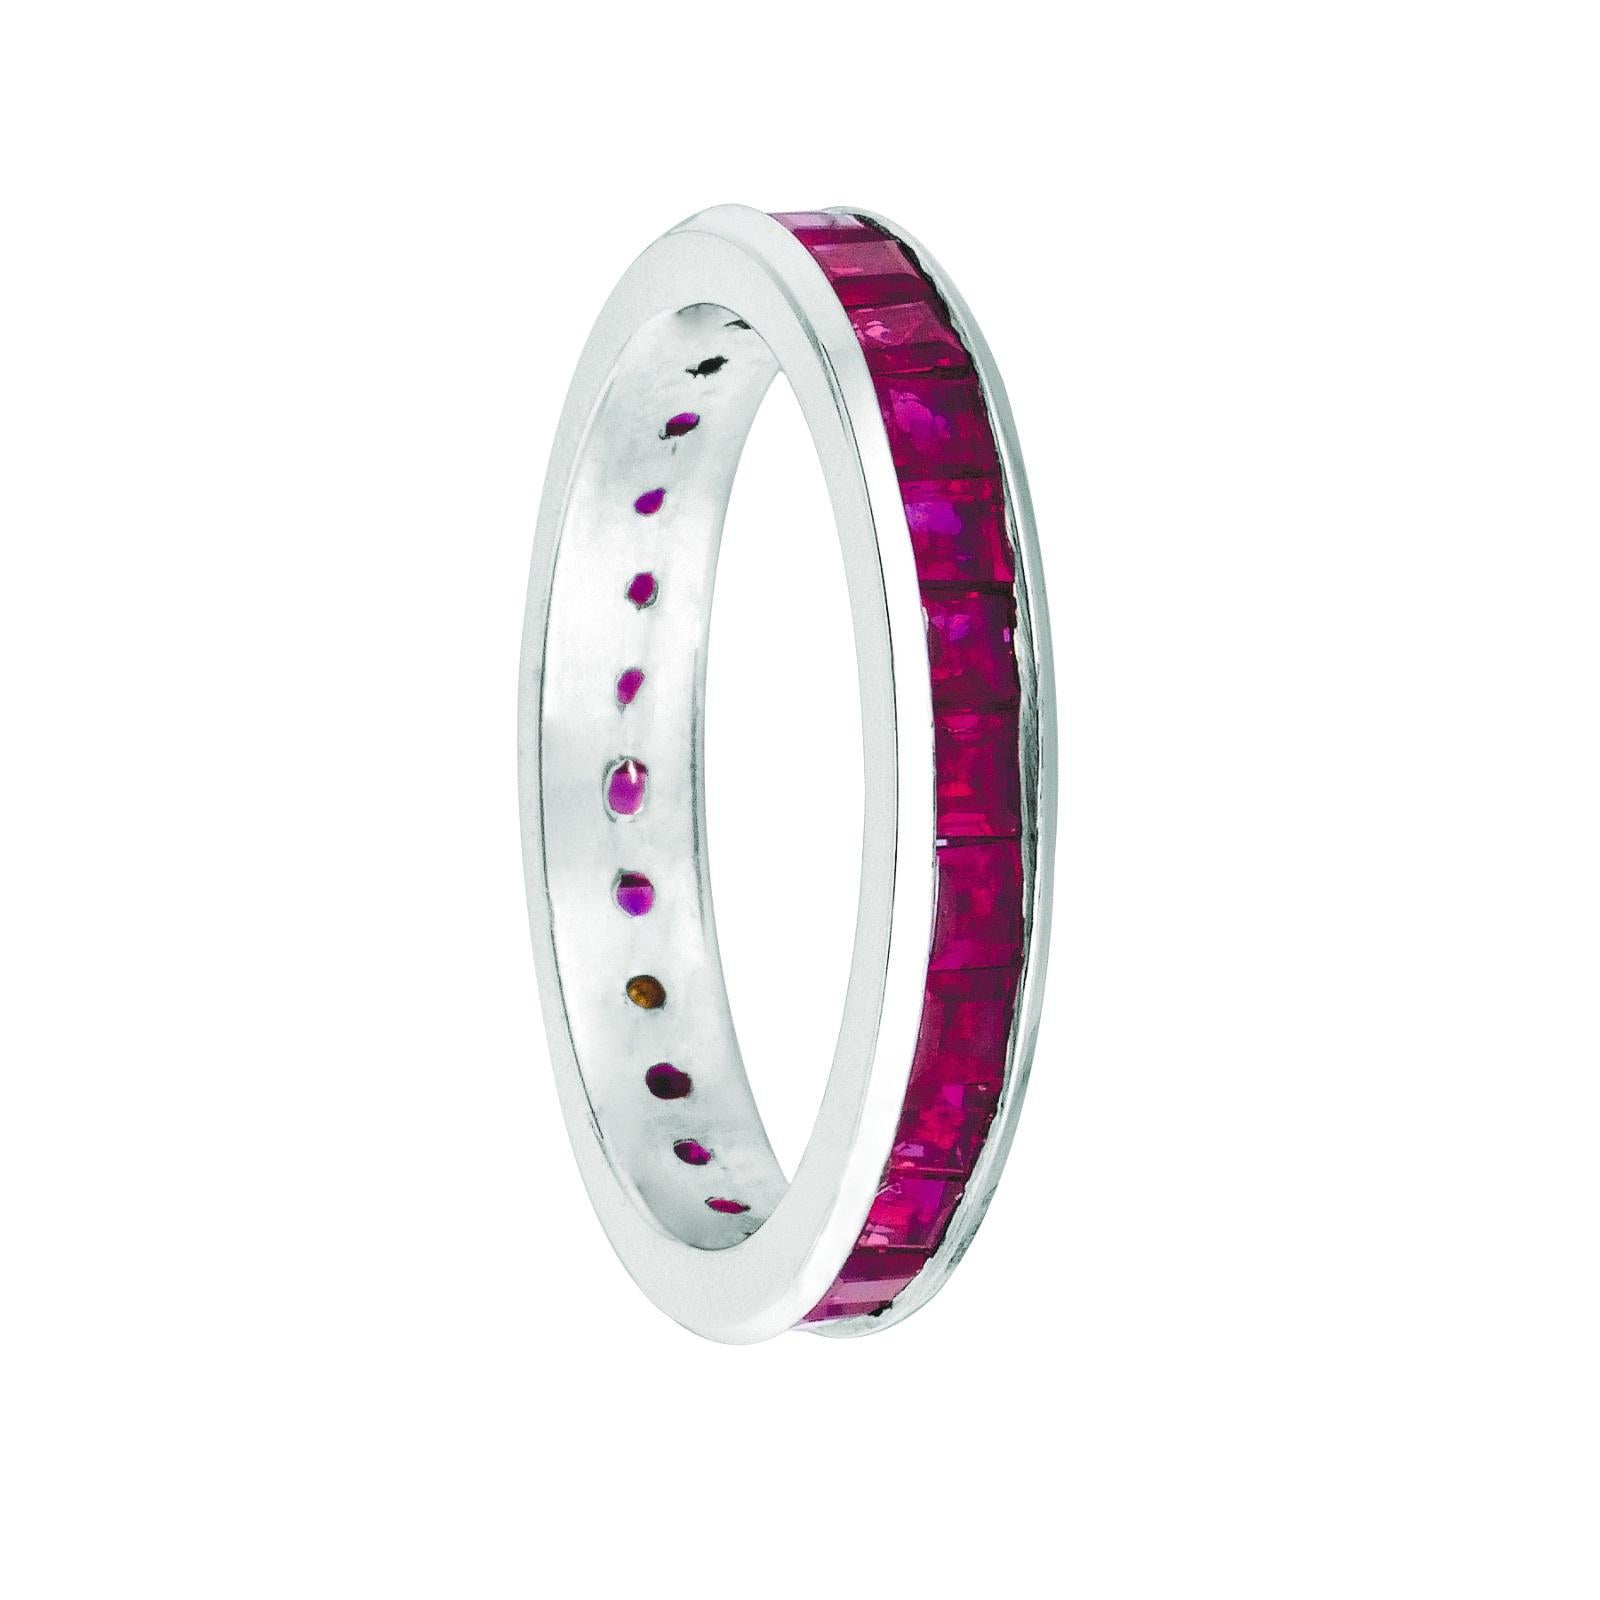 3.05 Carat Natural Ruby Eternity Ring G SI 14K White Gold

100% Natural Rubies
3.05CTW
Red
SI
14K White Gold Channel style, 4.8 grams
3 mm in width
Size 7
27 stones

R5959WR

ALL OUR ITEMS ARE AVAILABLE TO BE ORDERED IN 14K WHITE, ROSE OR YELLOW